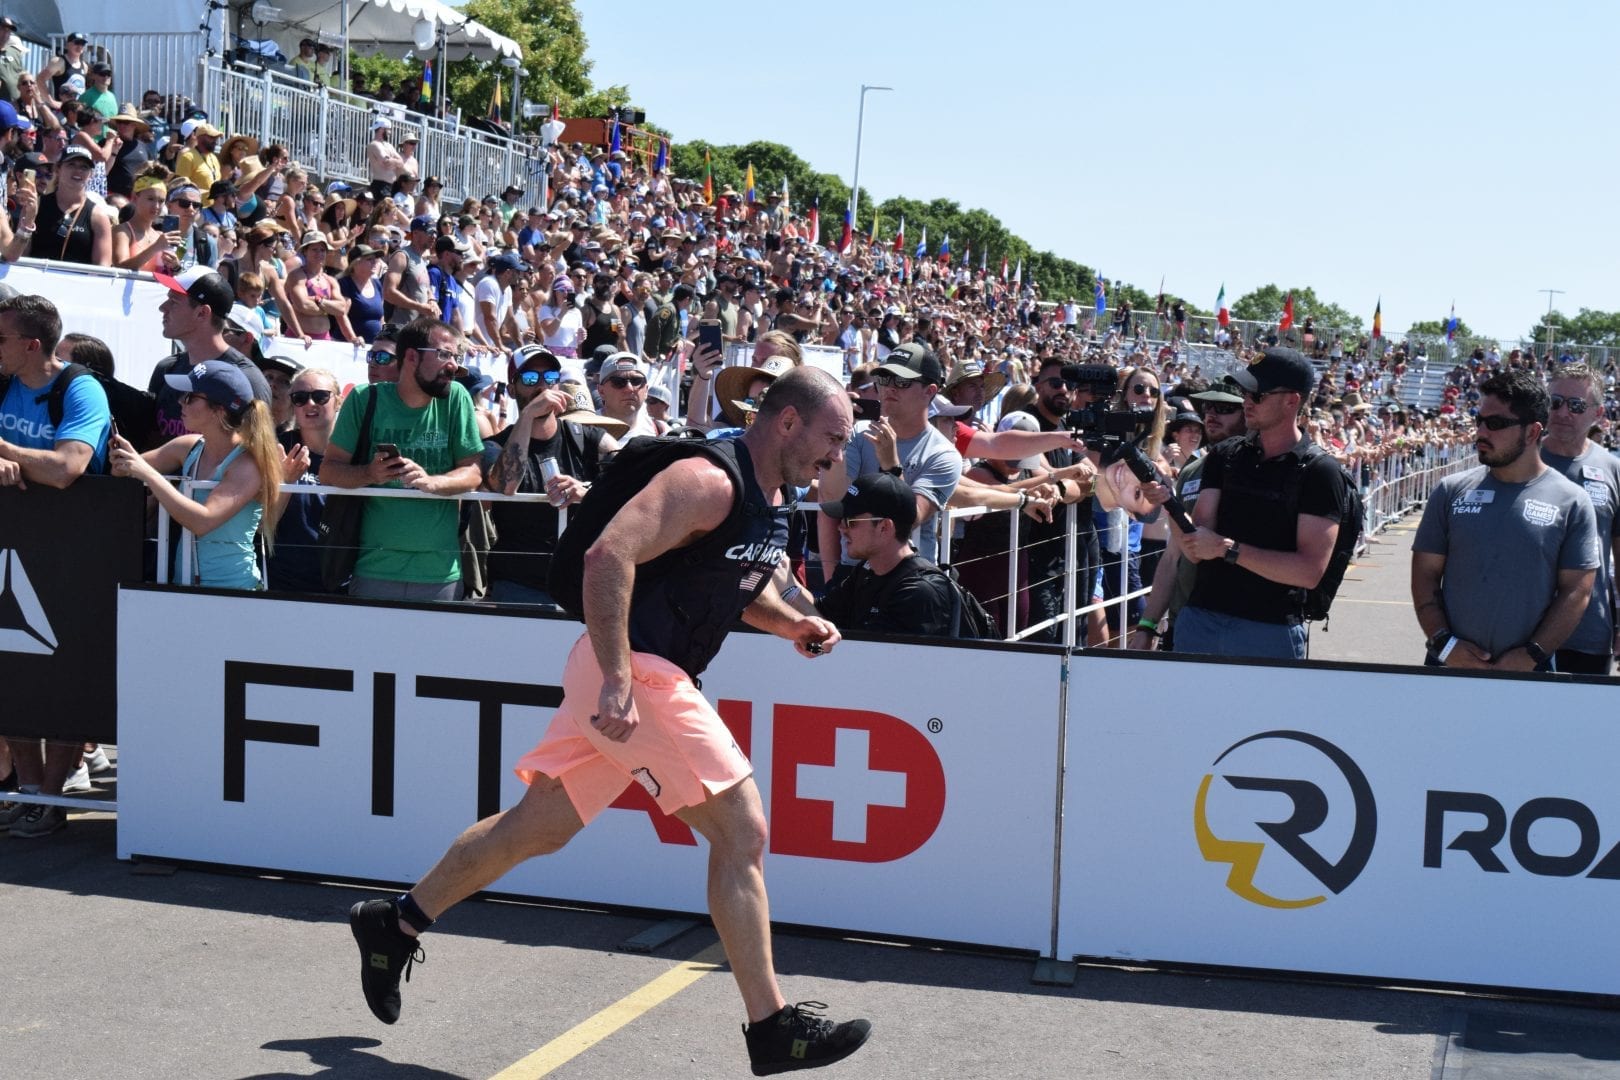 Eric Carmody of CrossFit Invictus completes the Ruck Run event at the 2019 CrossFit Games